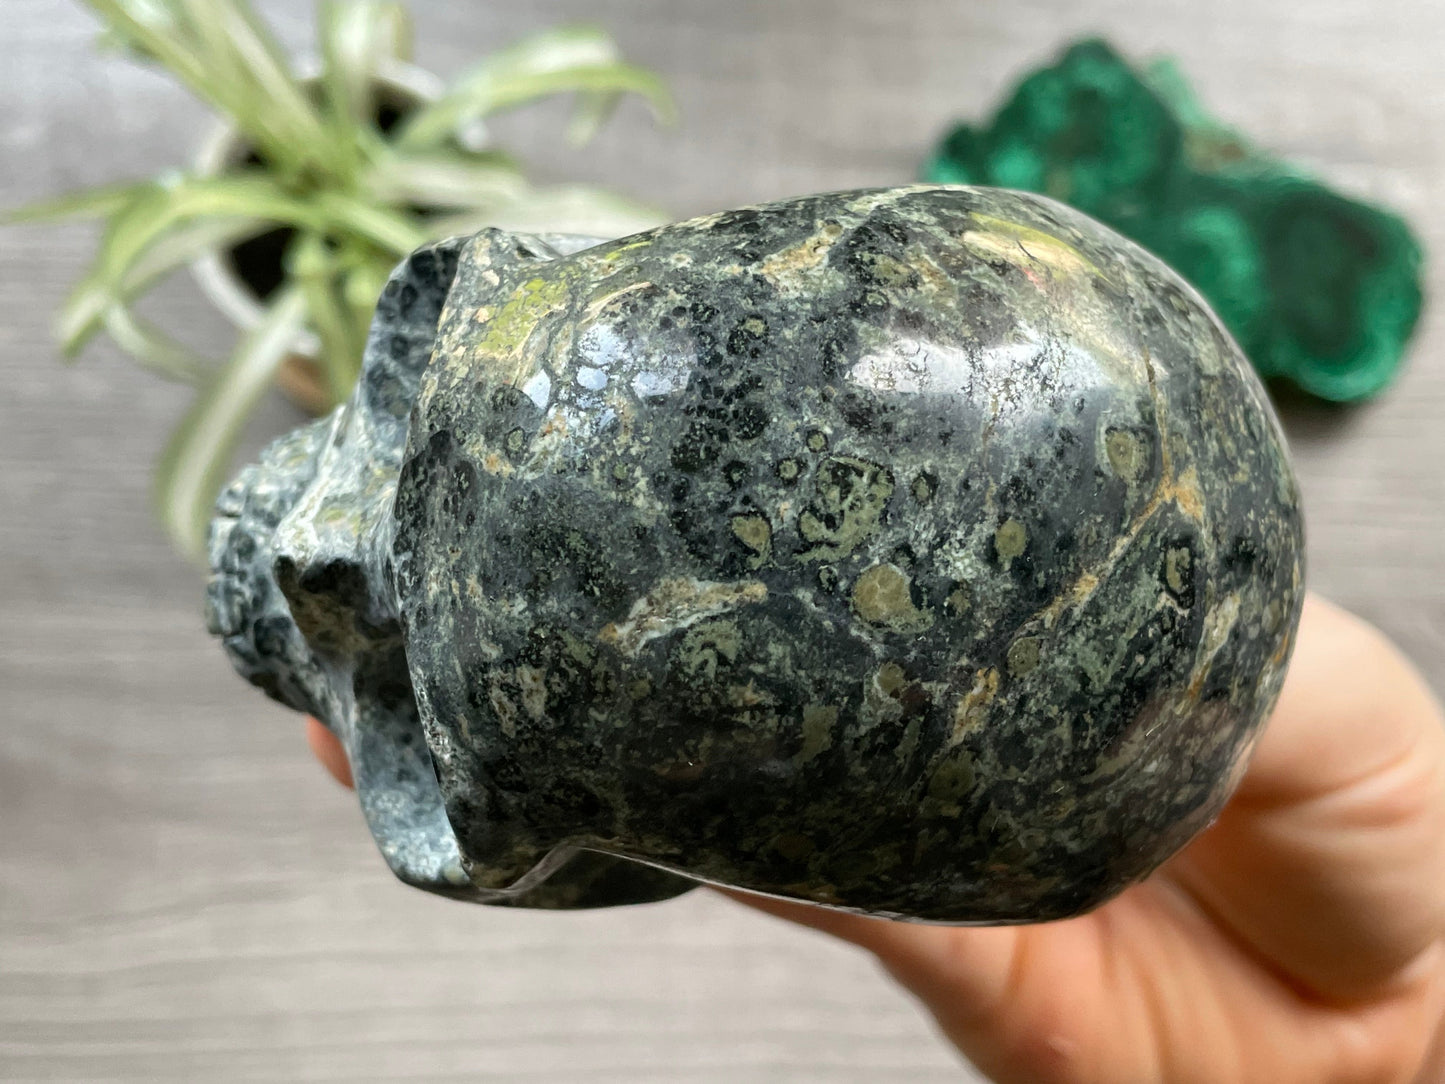 Pictured is a large skull carved out of Kambaba jasper.